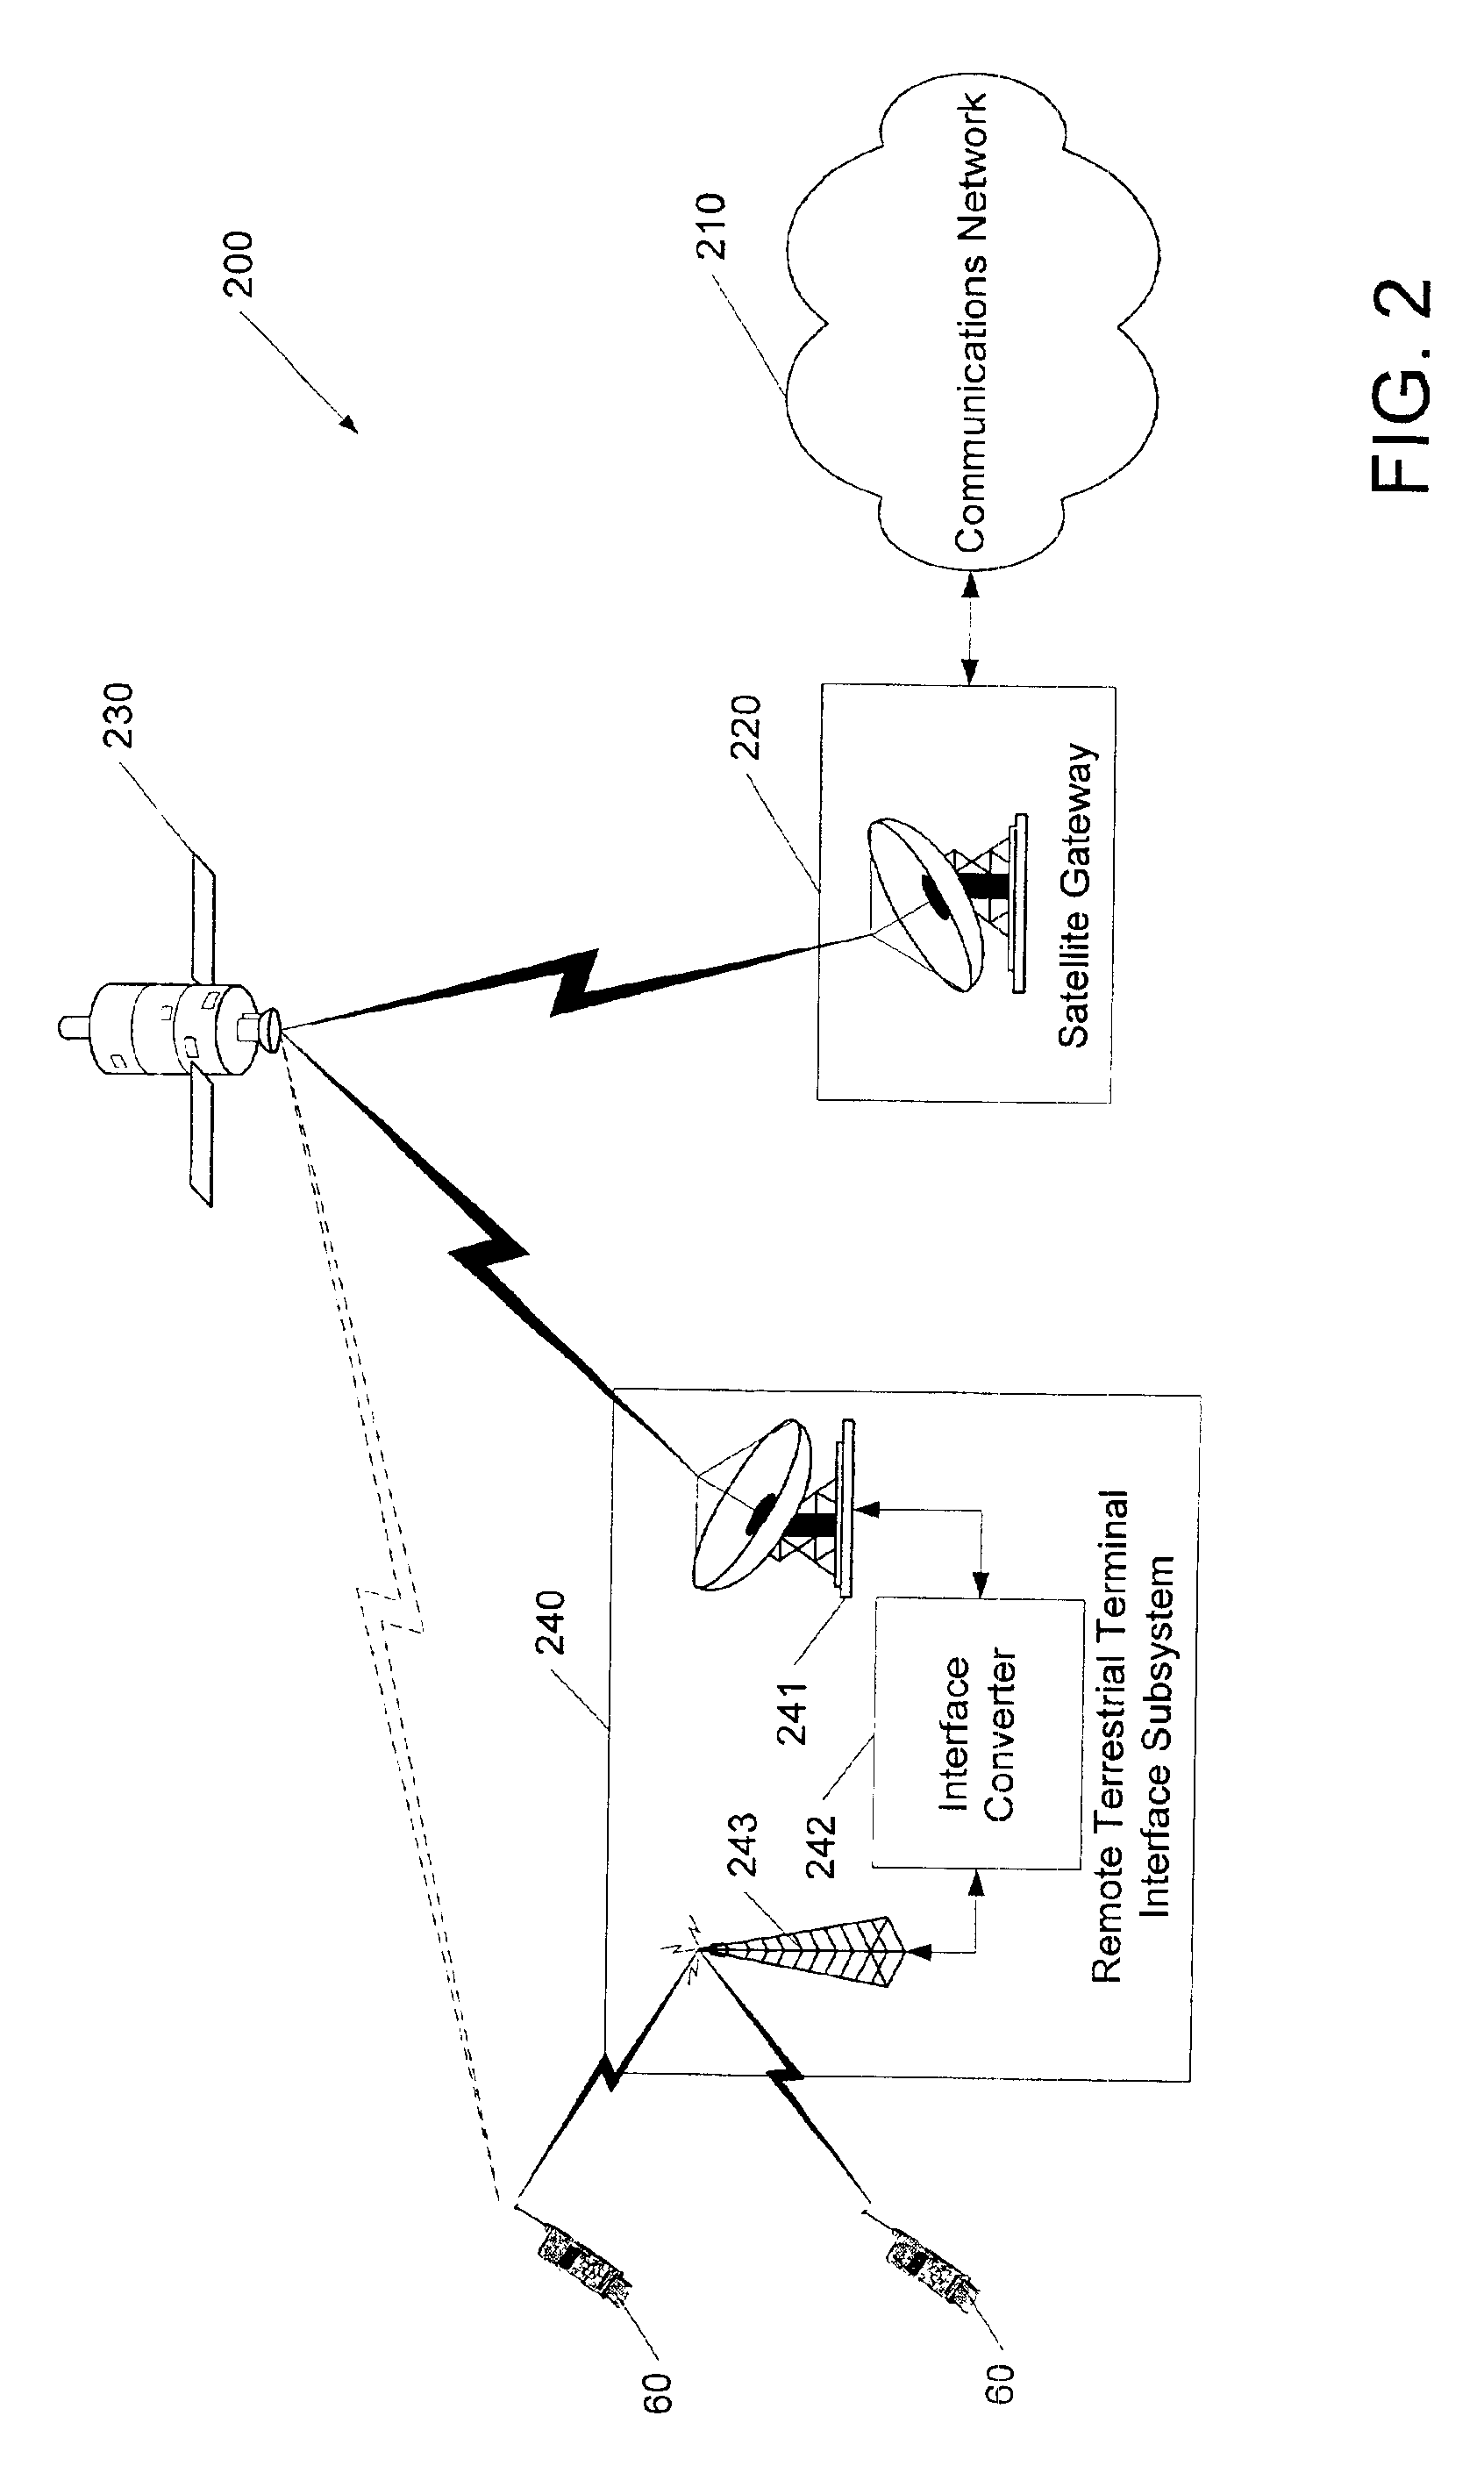 Wireless communications systems and methods using satellite-linked remote terminal interface subsystems